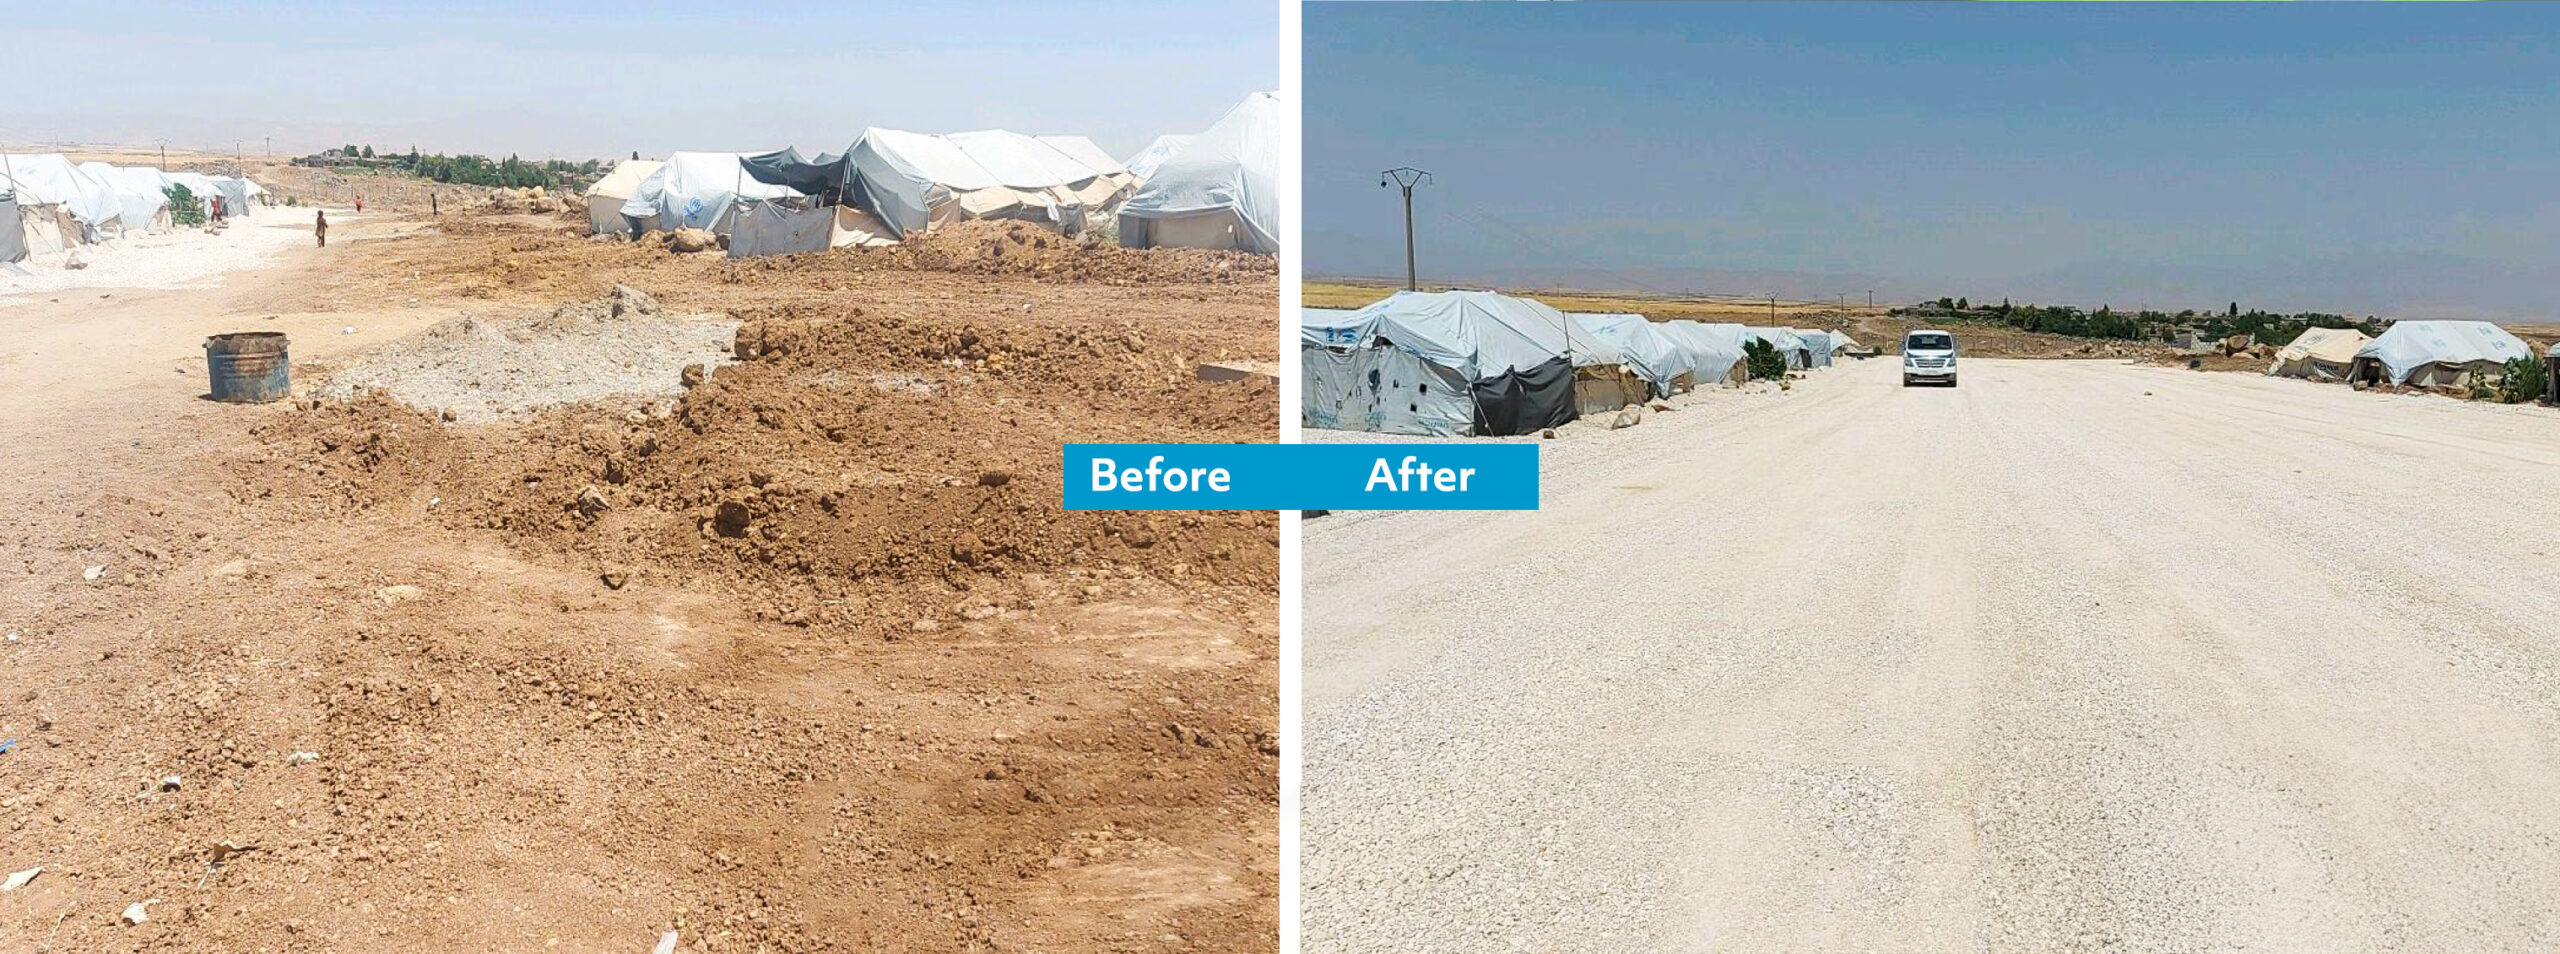 dirt road before and after reconstruction